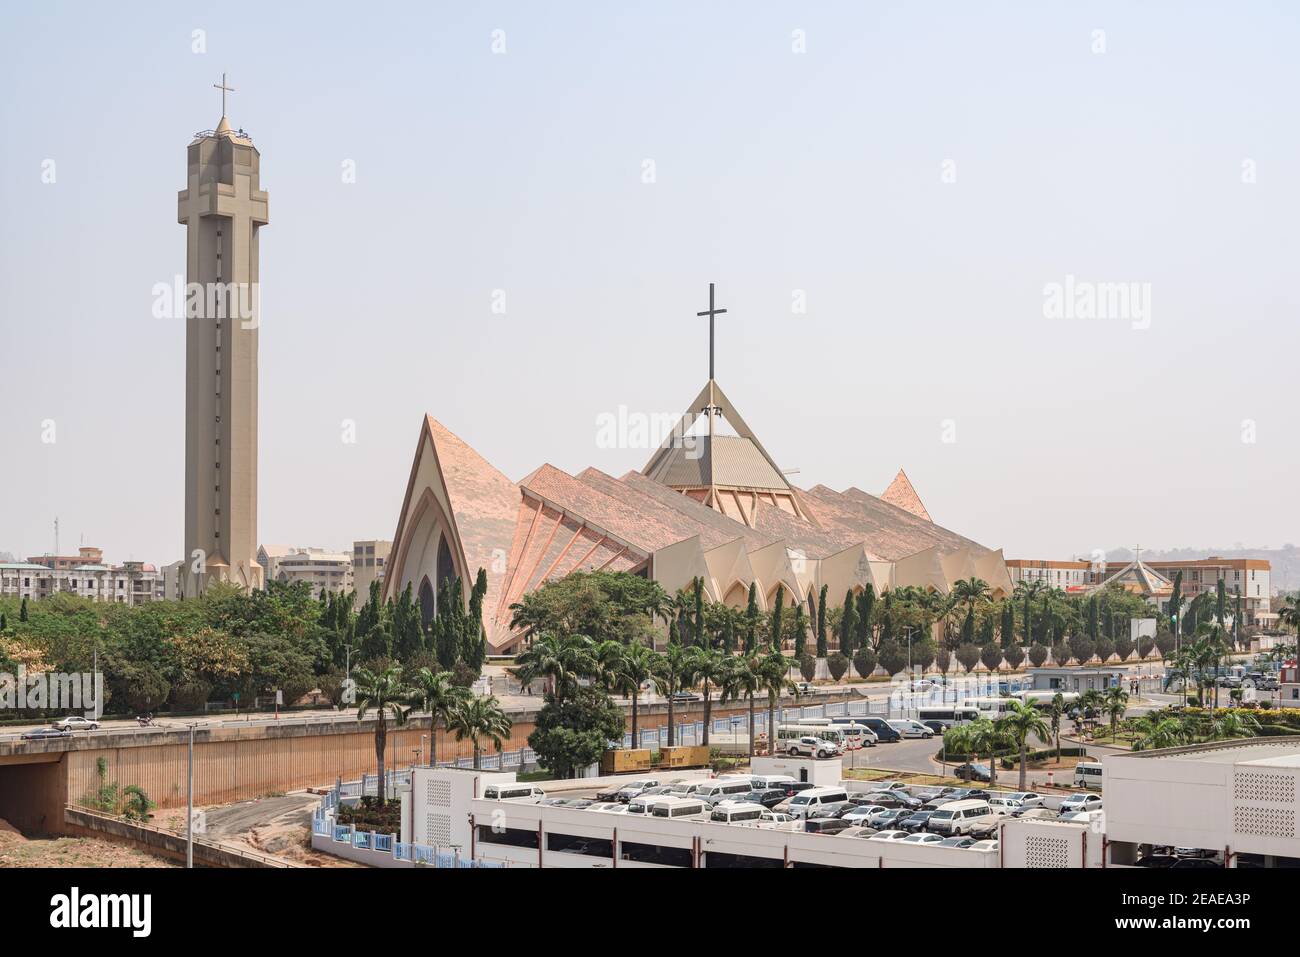 National Ecumenical center, a Christian building for religious ceremonies, in modern architecture style with spiked roof and cross shaped bell tower i Stock Photo